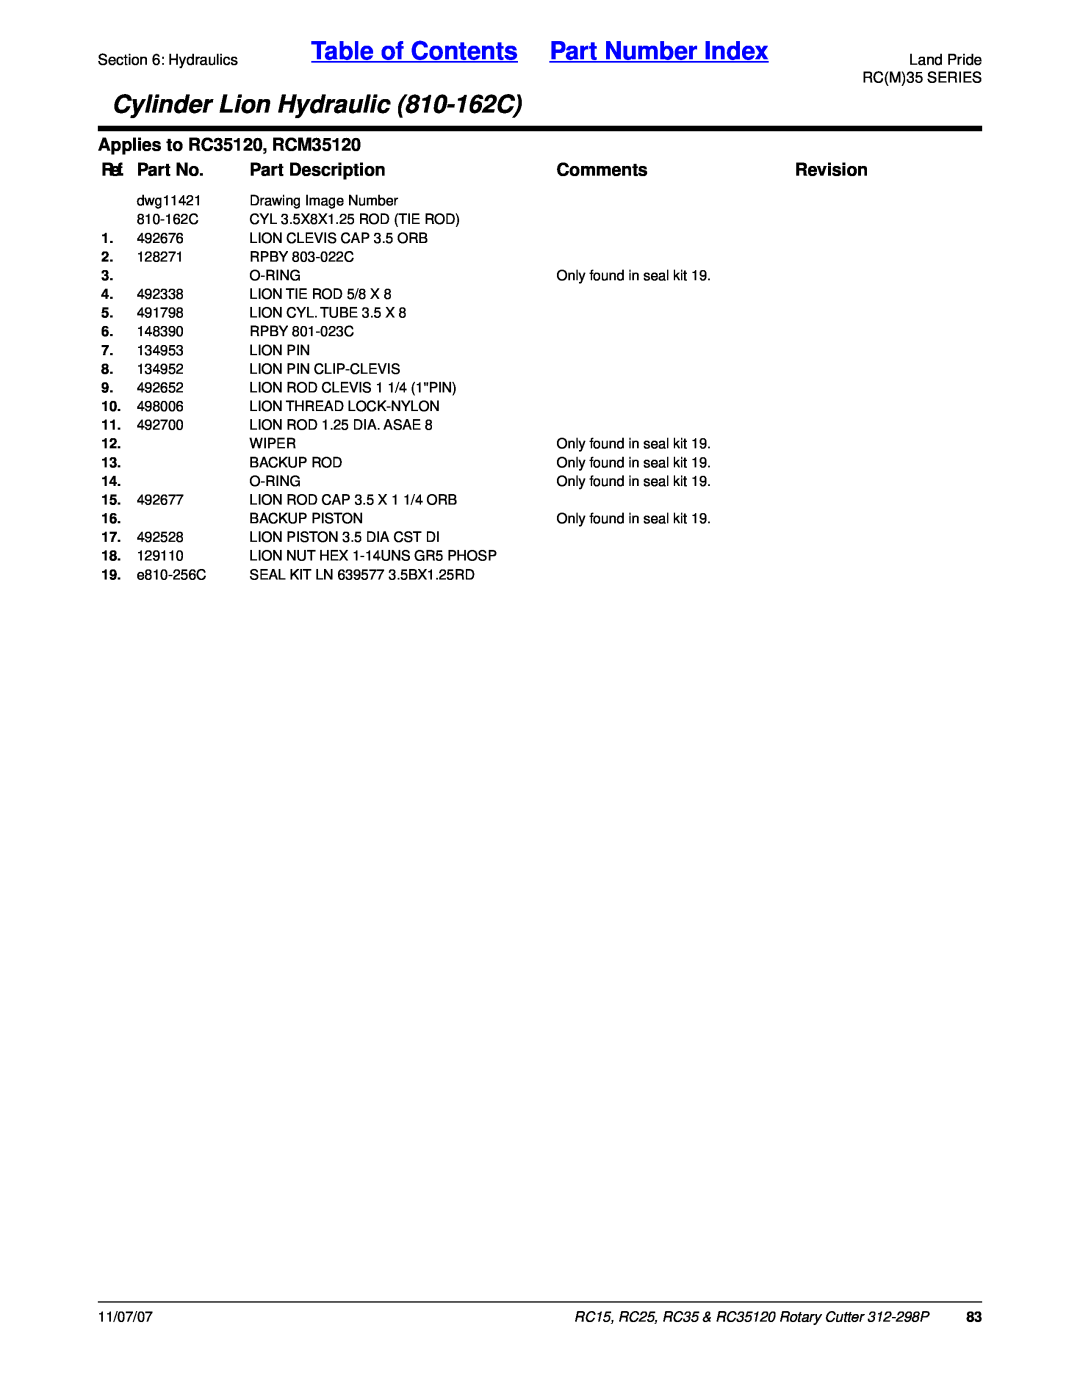 Land Pride RC15, RC25 Table of Contents Part Number Index, Cylinder Lion Hydraulic 810-162C, Applies to RC35120, RCM35120 